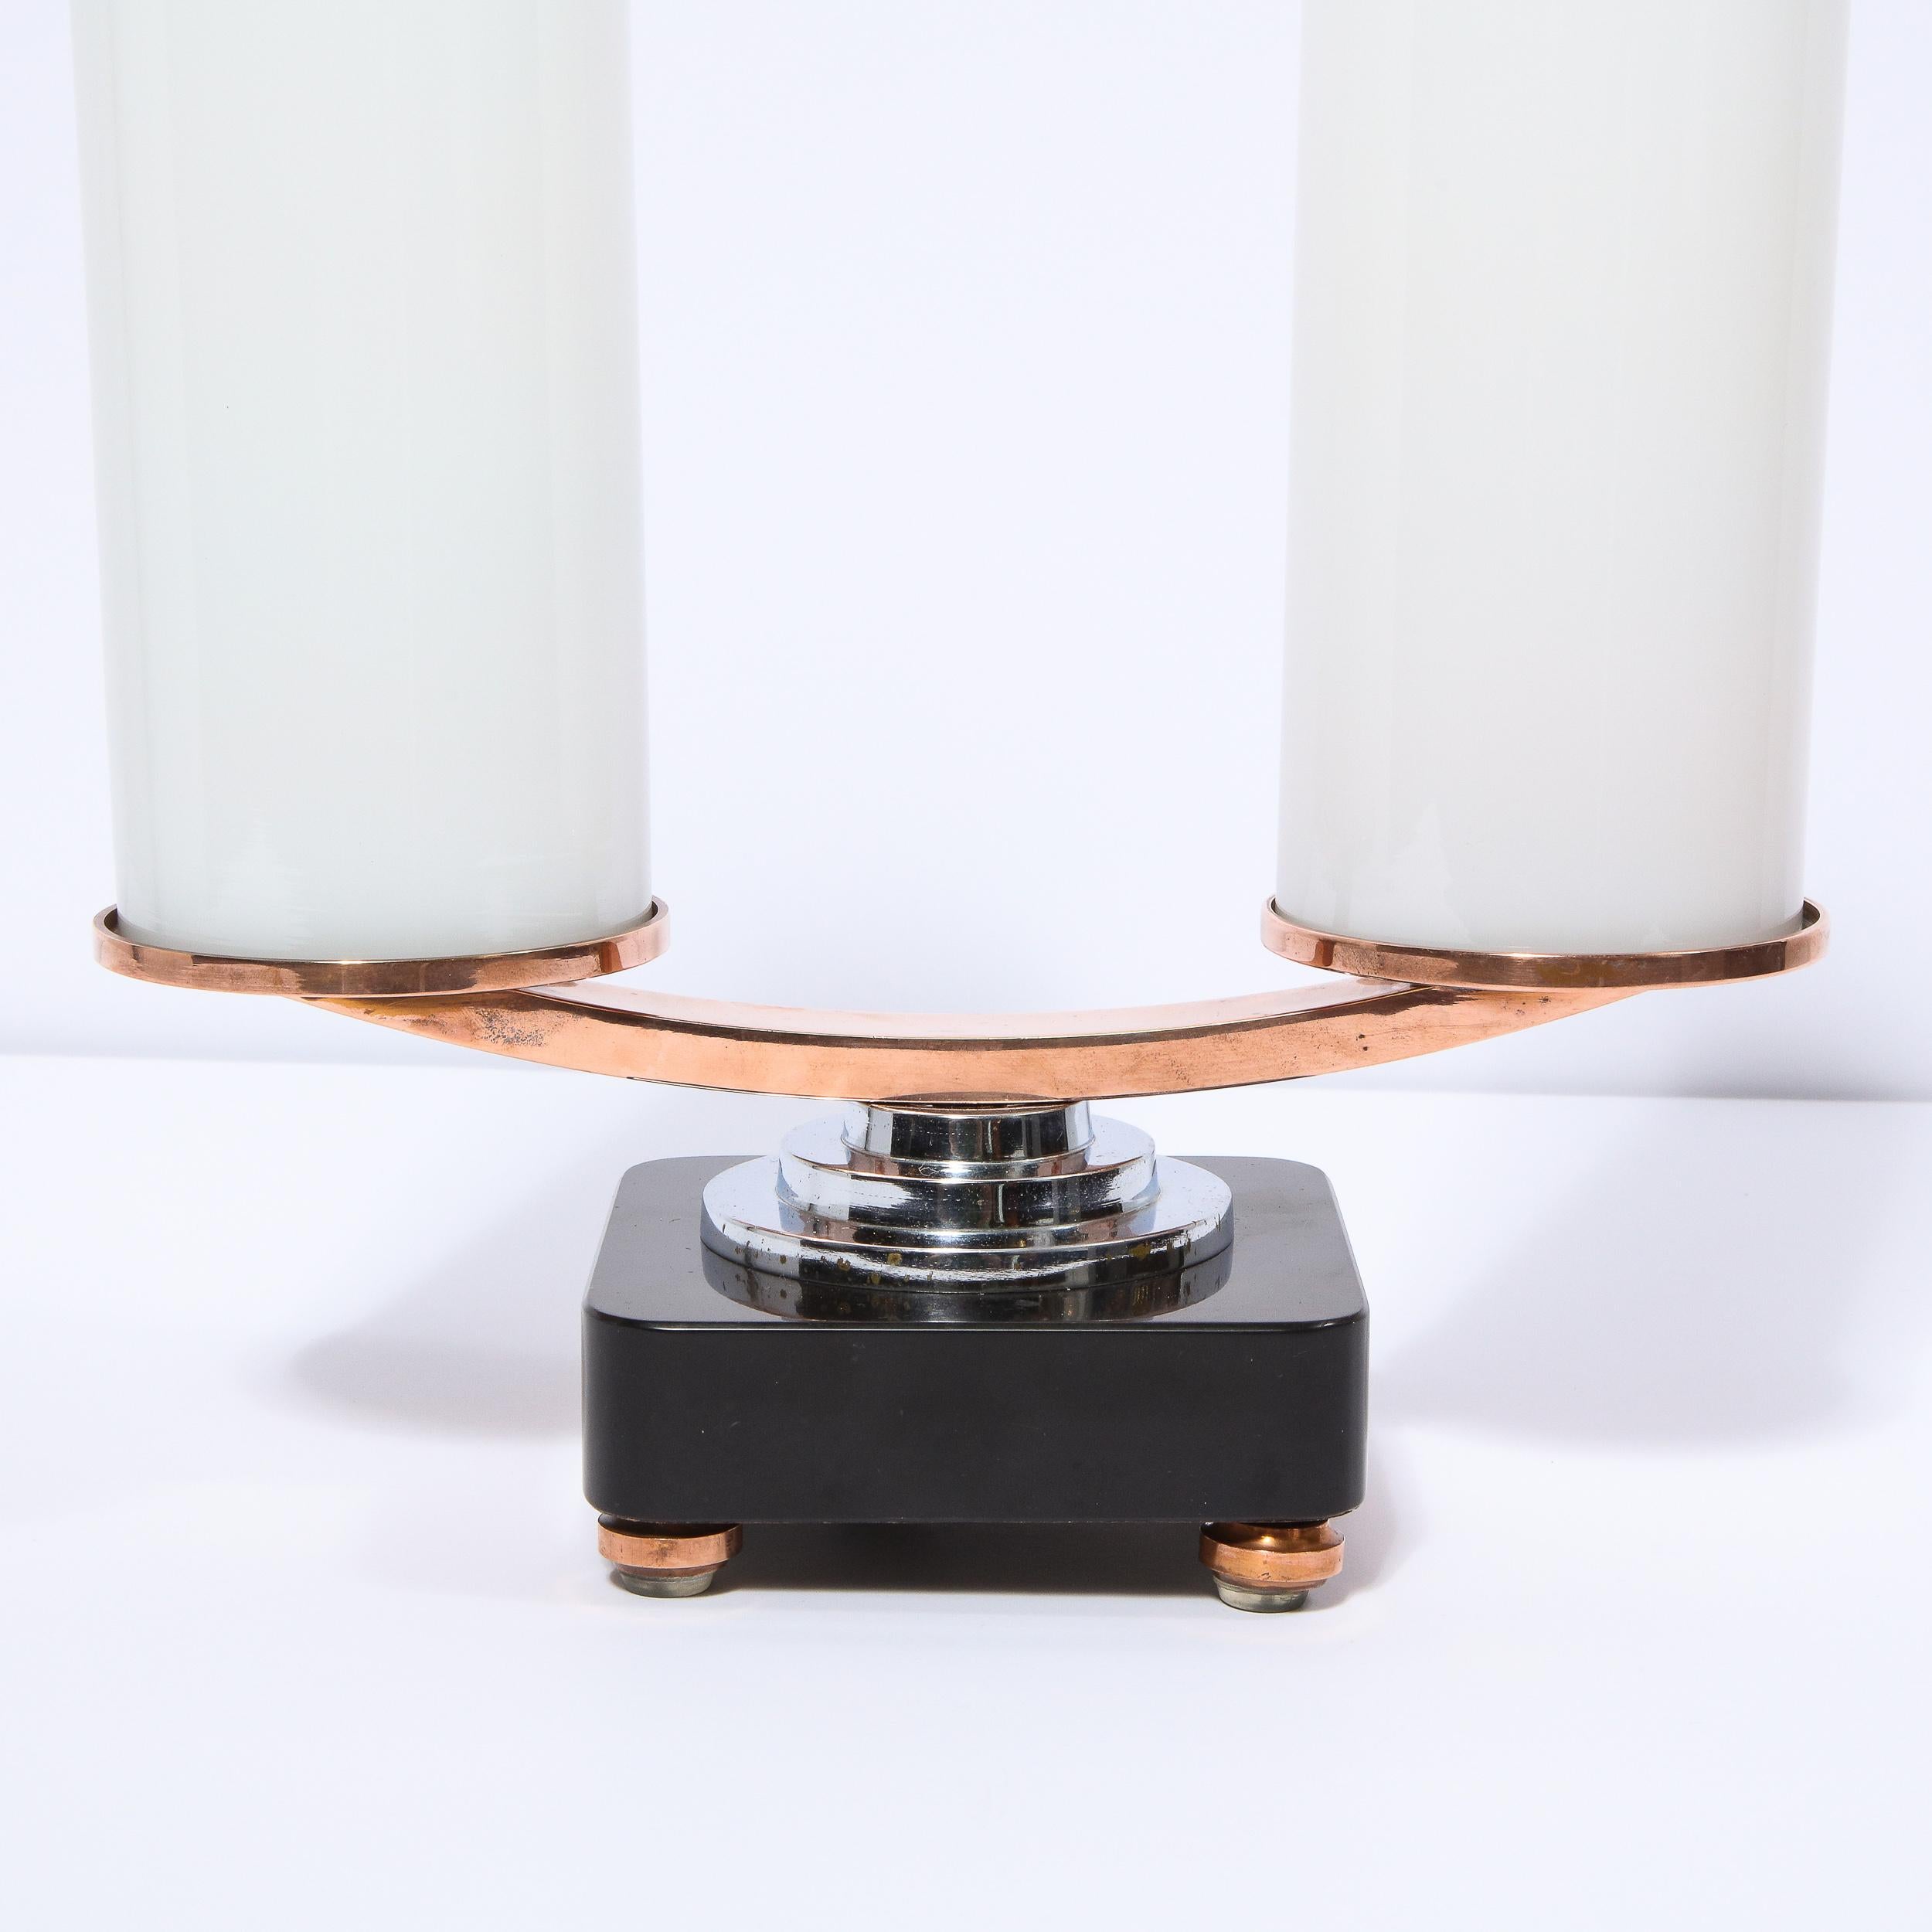 This stunning Art Deco Machine Age skyscraper style streamlined table lamp was realized in the United States, circa 1935. It features a volumetric square vitrolite glass base with rounded corners and round skyscraper style chrome & copper feet. A